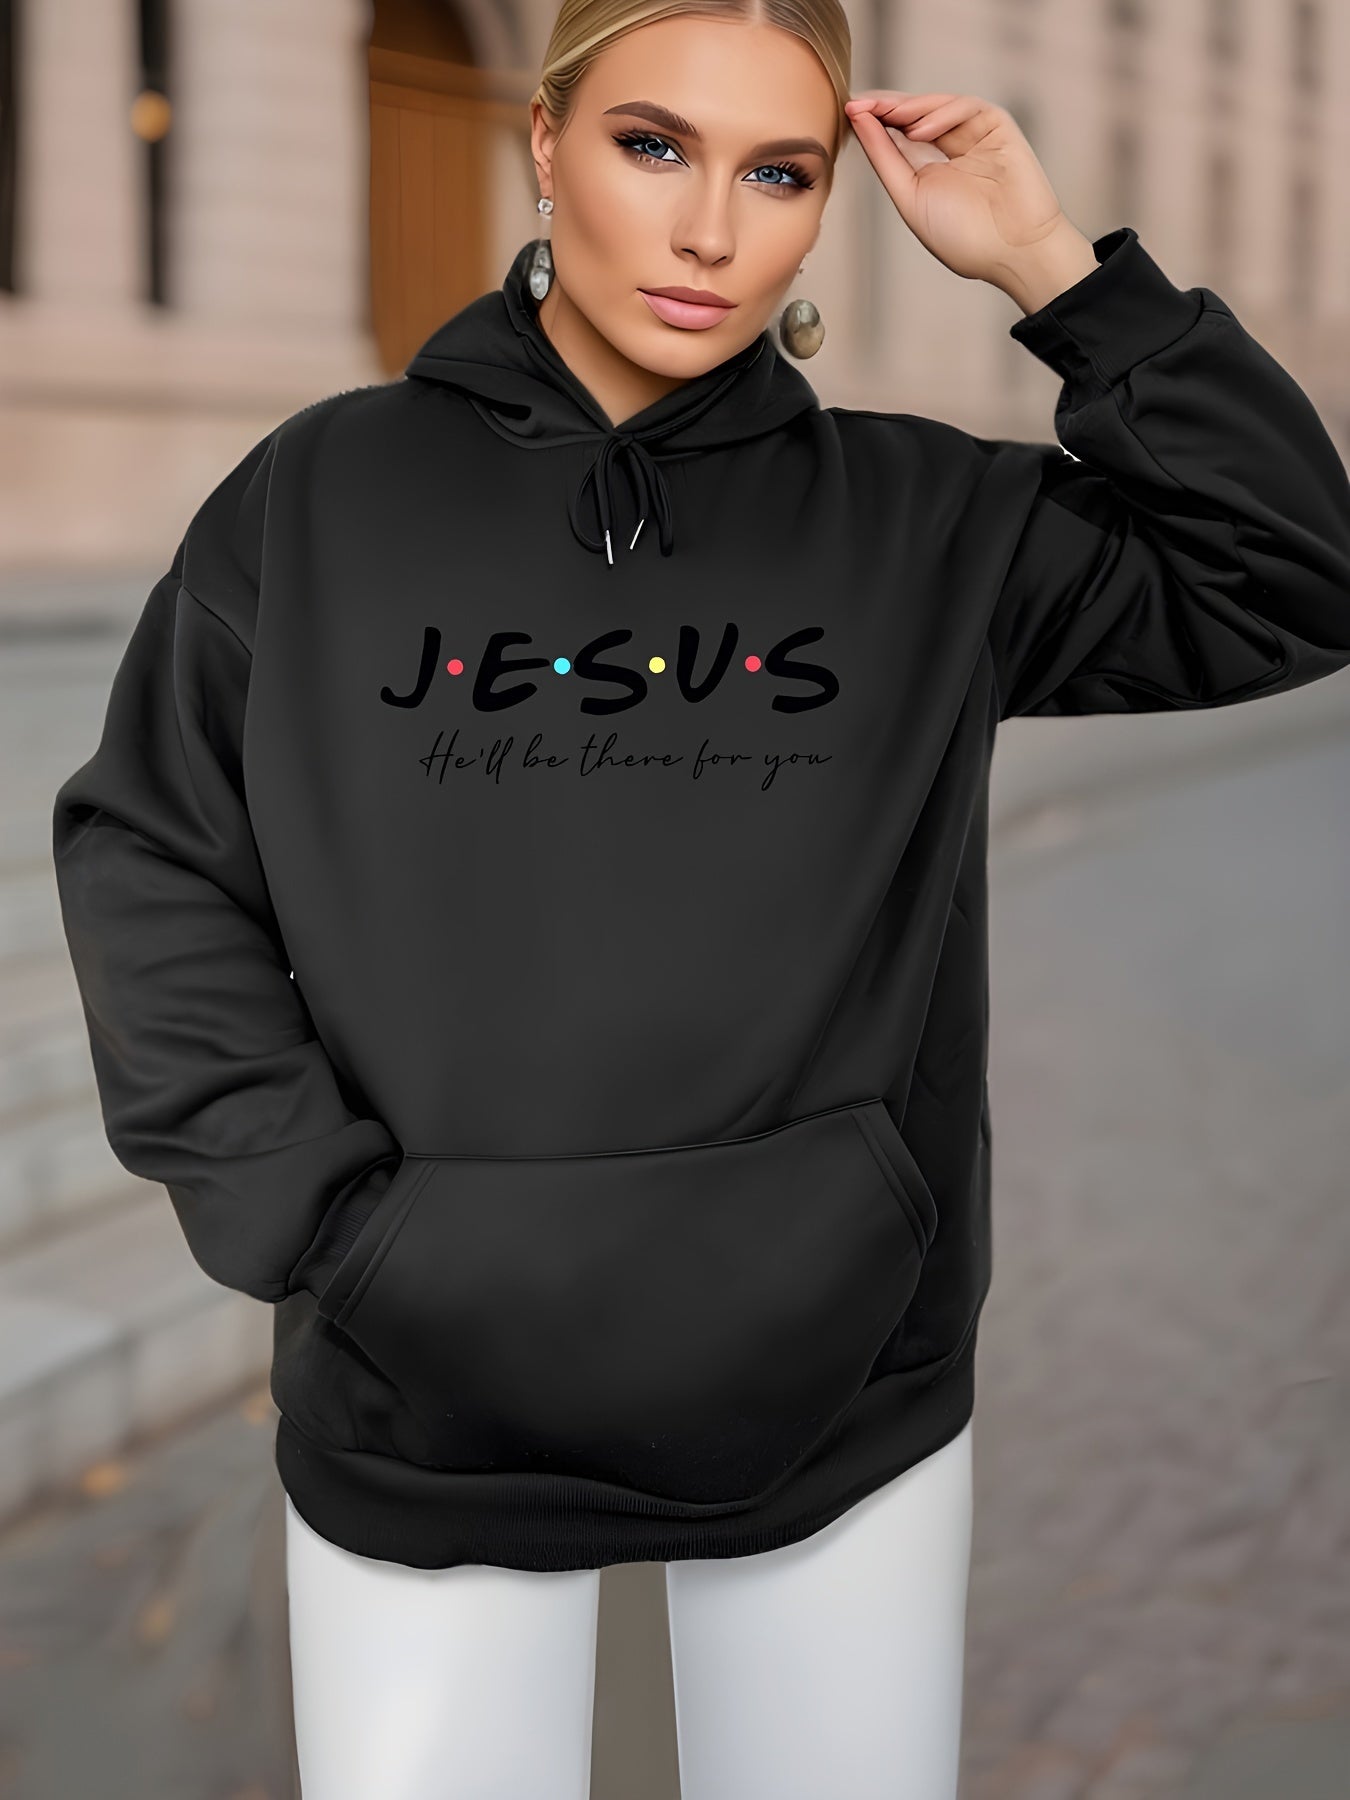 Jesus He'll Be There For You Women's Christian Pullover Hooded Sweatshirt claimedbygoddesigns